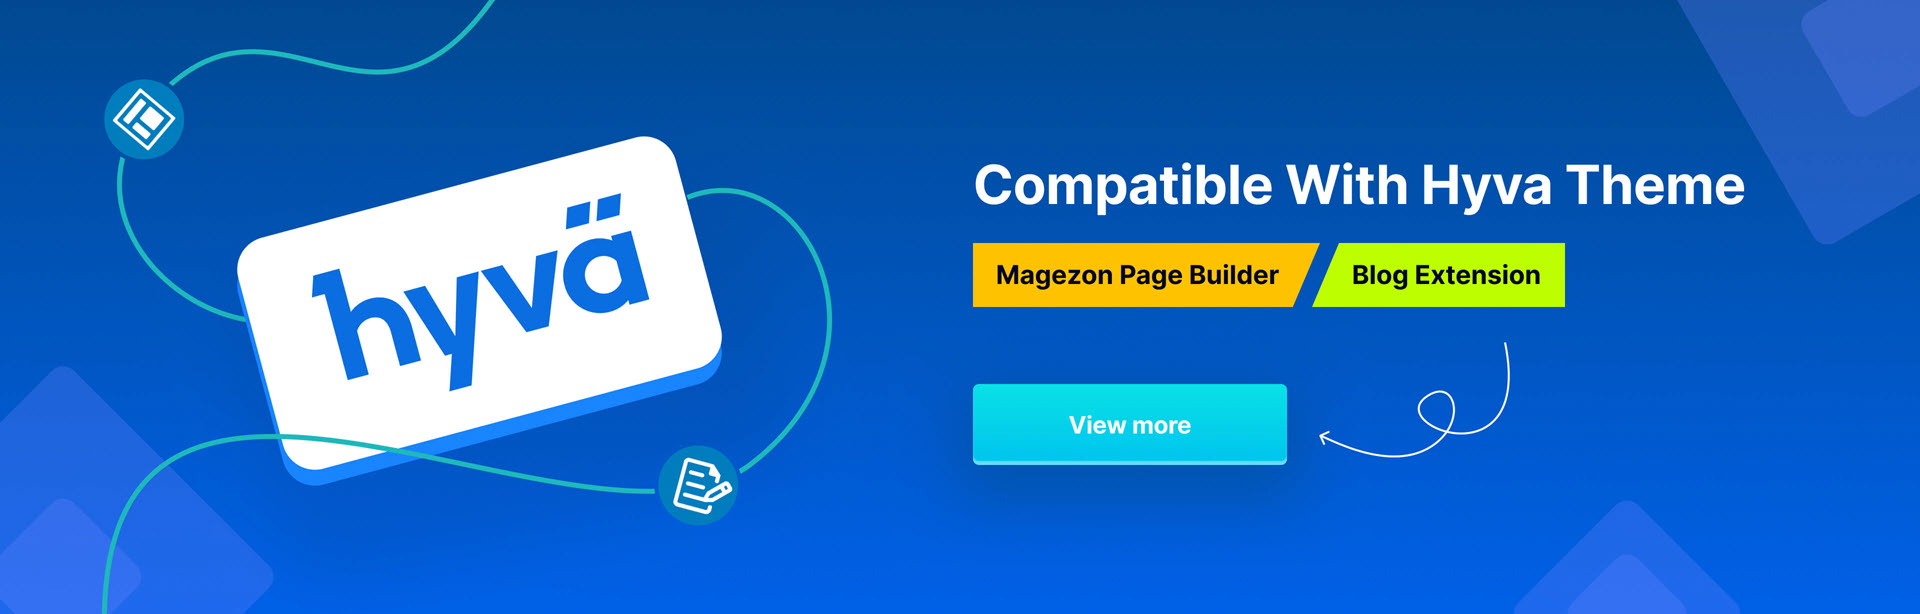 Page Builder & Blog are compatible with Hyva theme